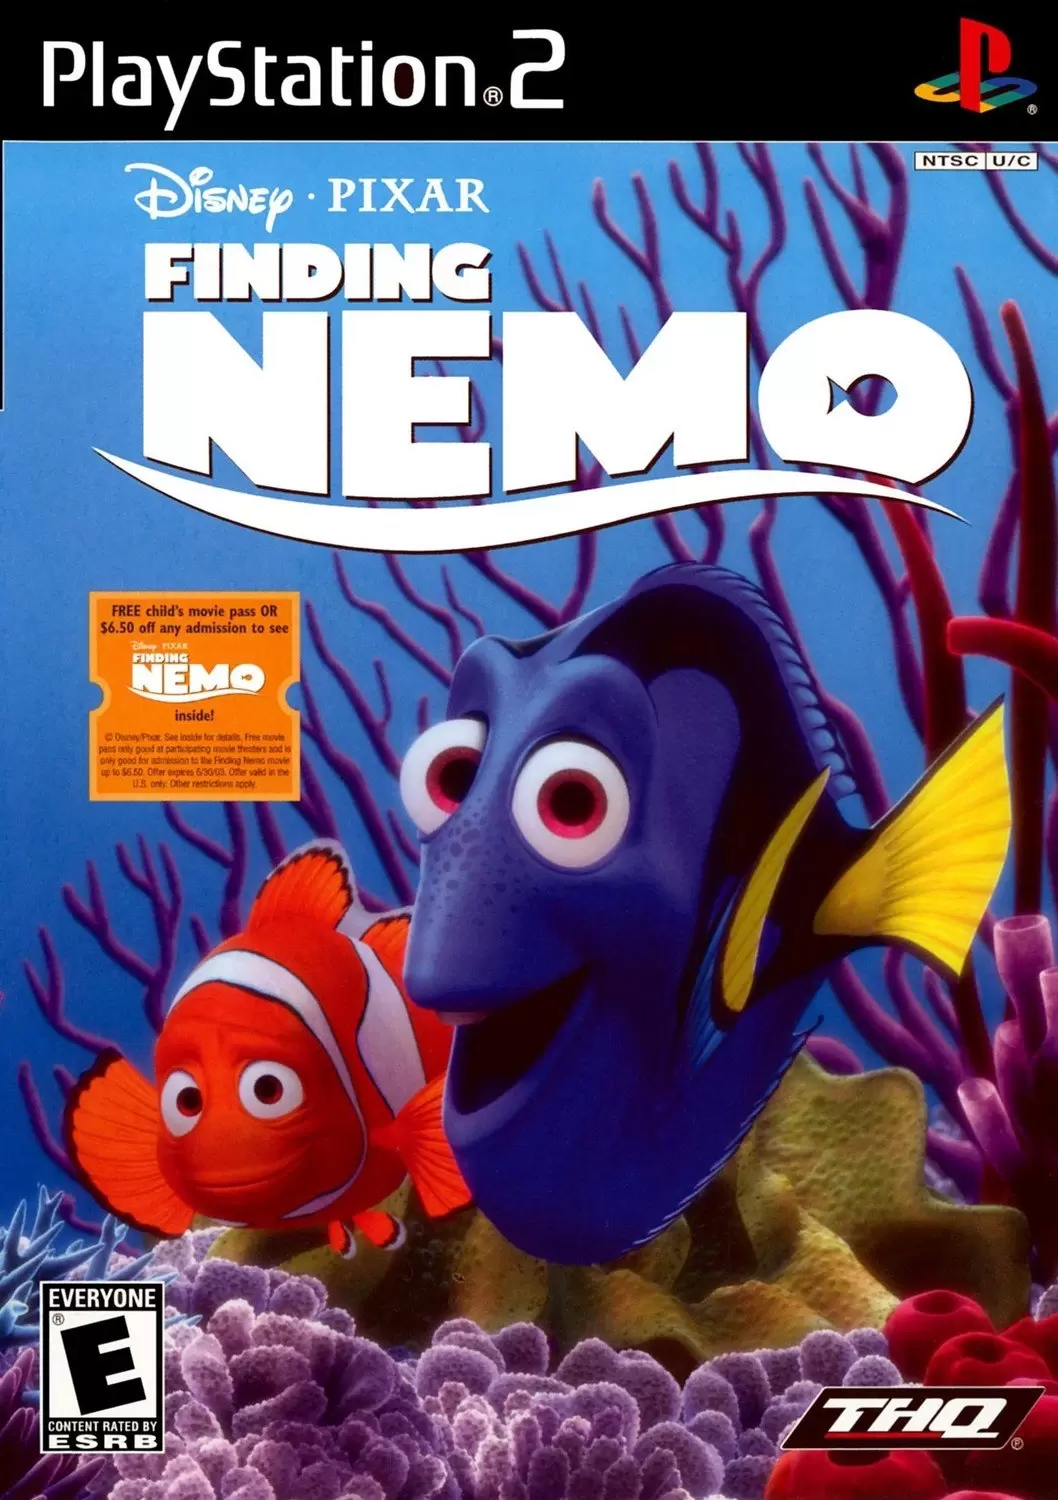 PS2 Games - Finding Nemo